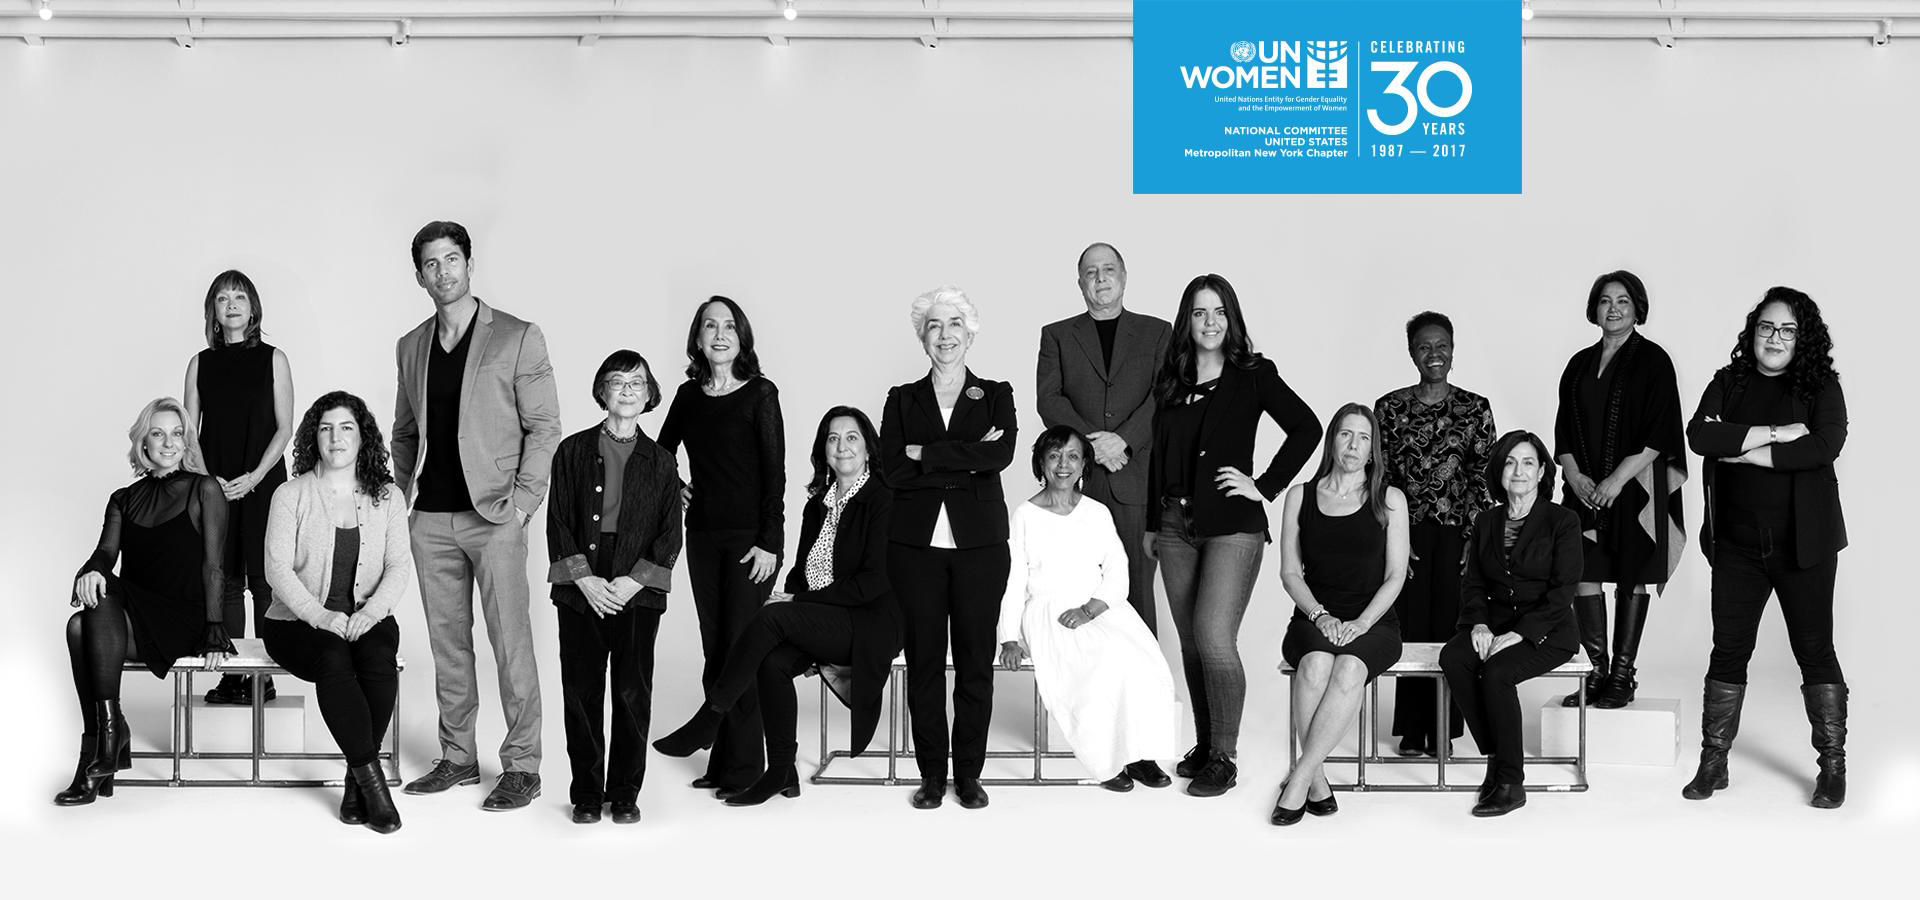 united nations un women champions of change 2018 equality global